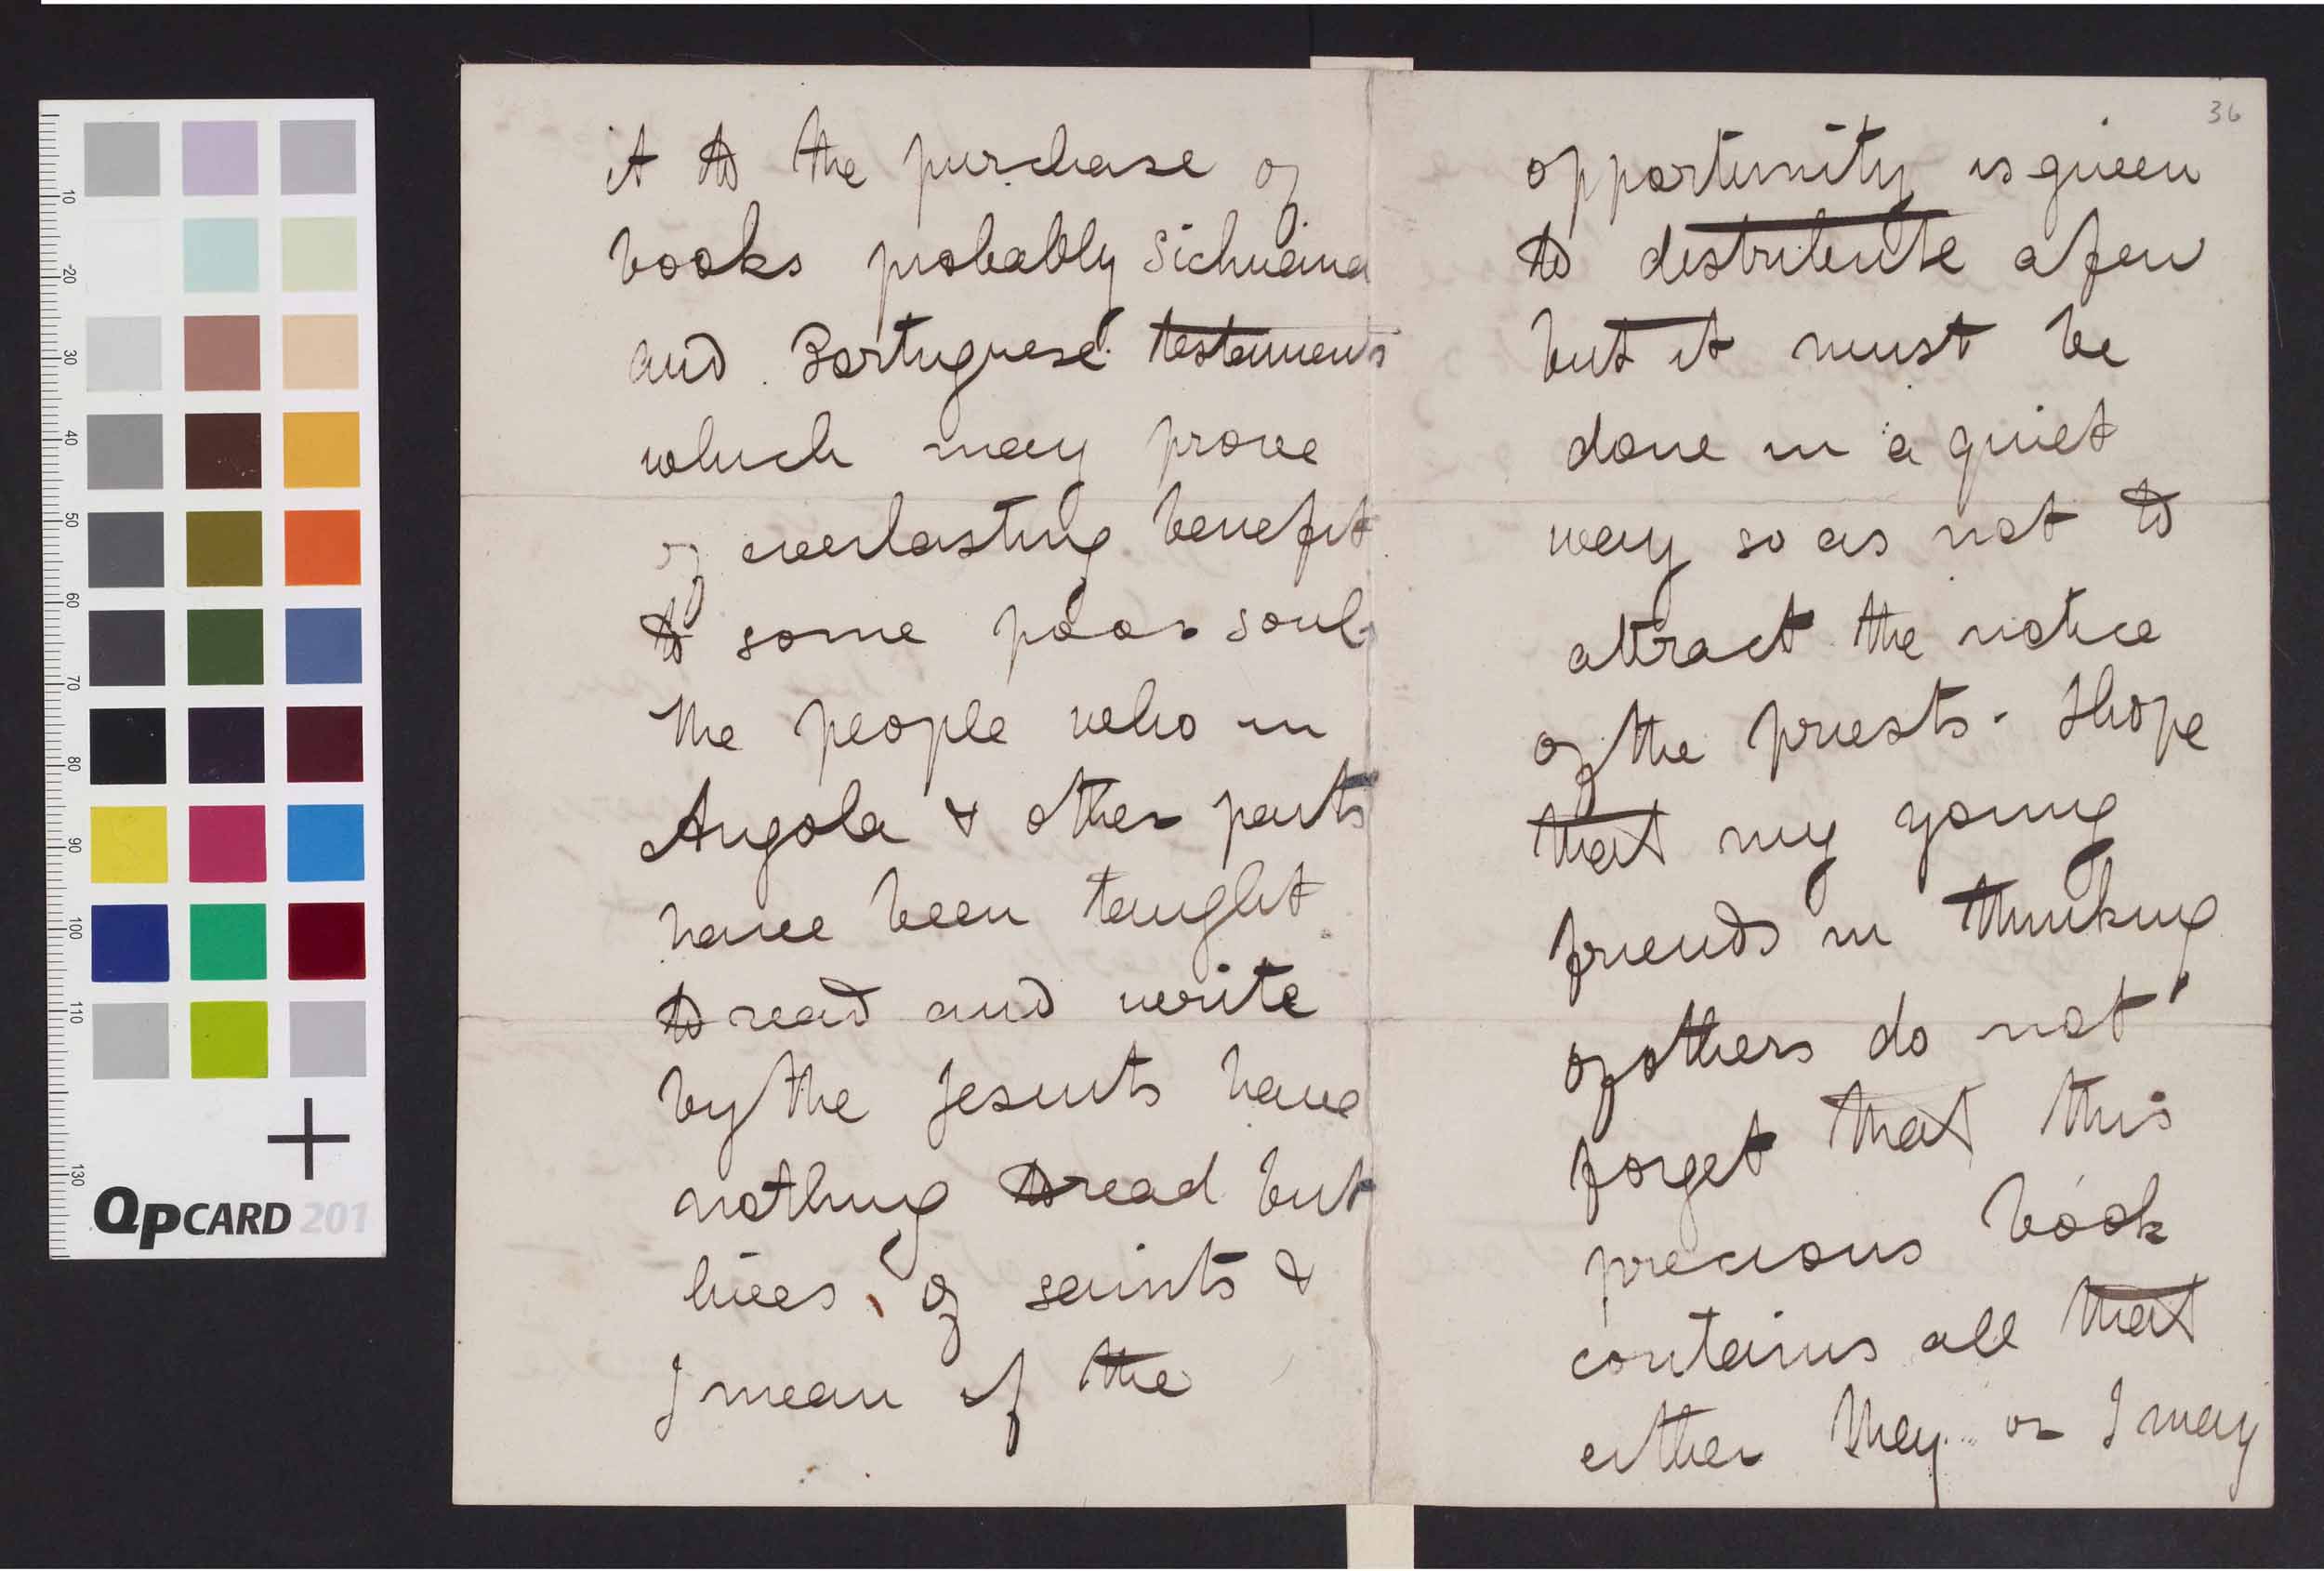 Letter to Henry White, 3 October 1857, by David Livingstone. Copyright National Library of Scotland and Dr. Neil Imray Livingstone Wilson (as relevant). Creative Commons Share-alike 2.5 UK: Scotland license (https://creativecommons.org/licenses/by-nc-sa/2.5/scotland/)